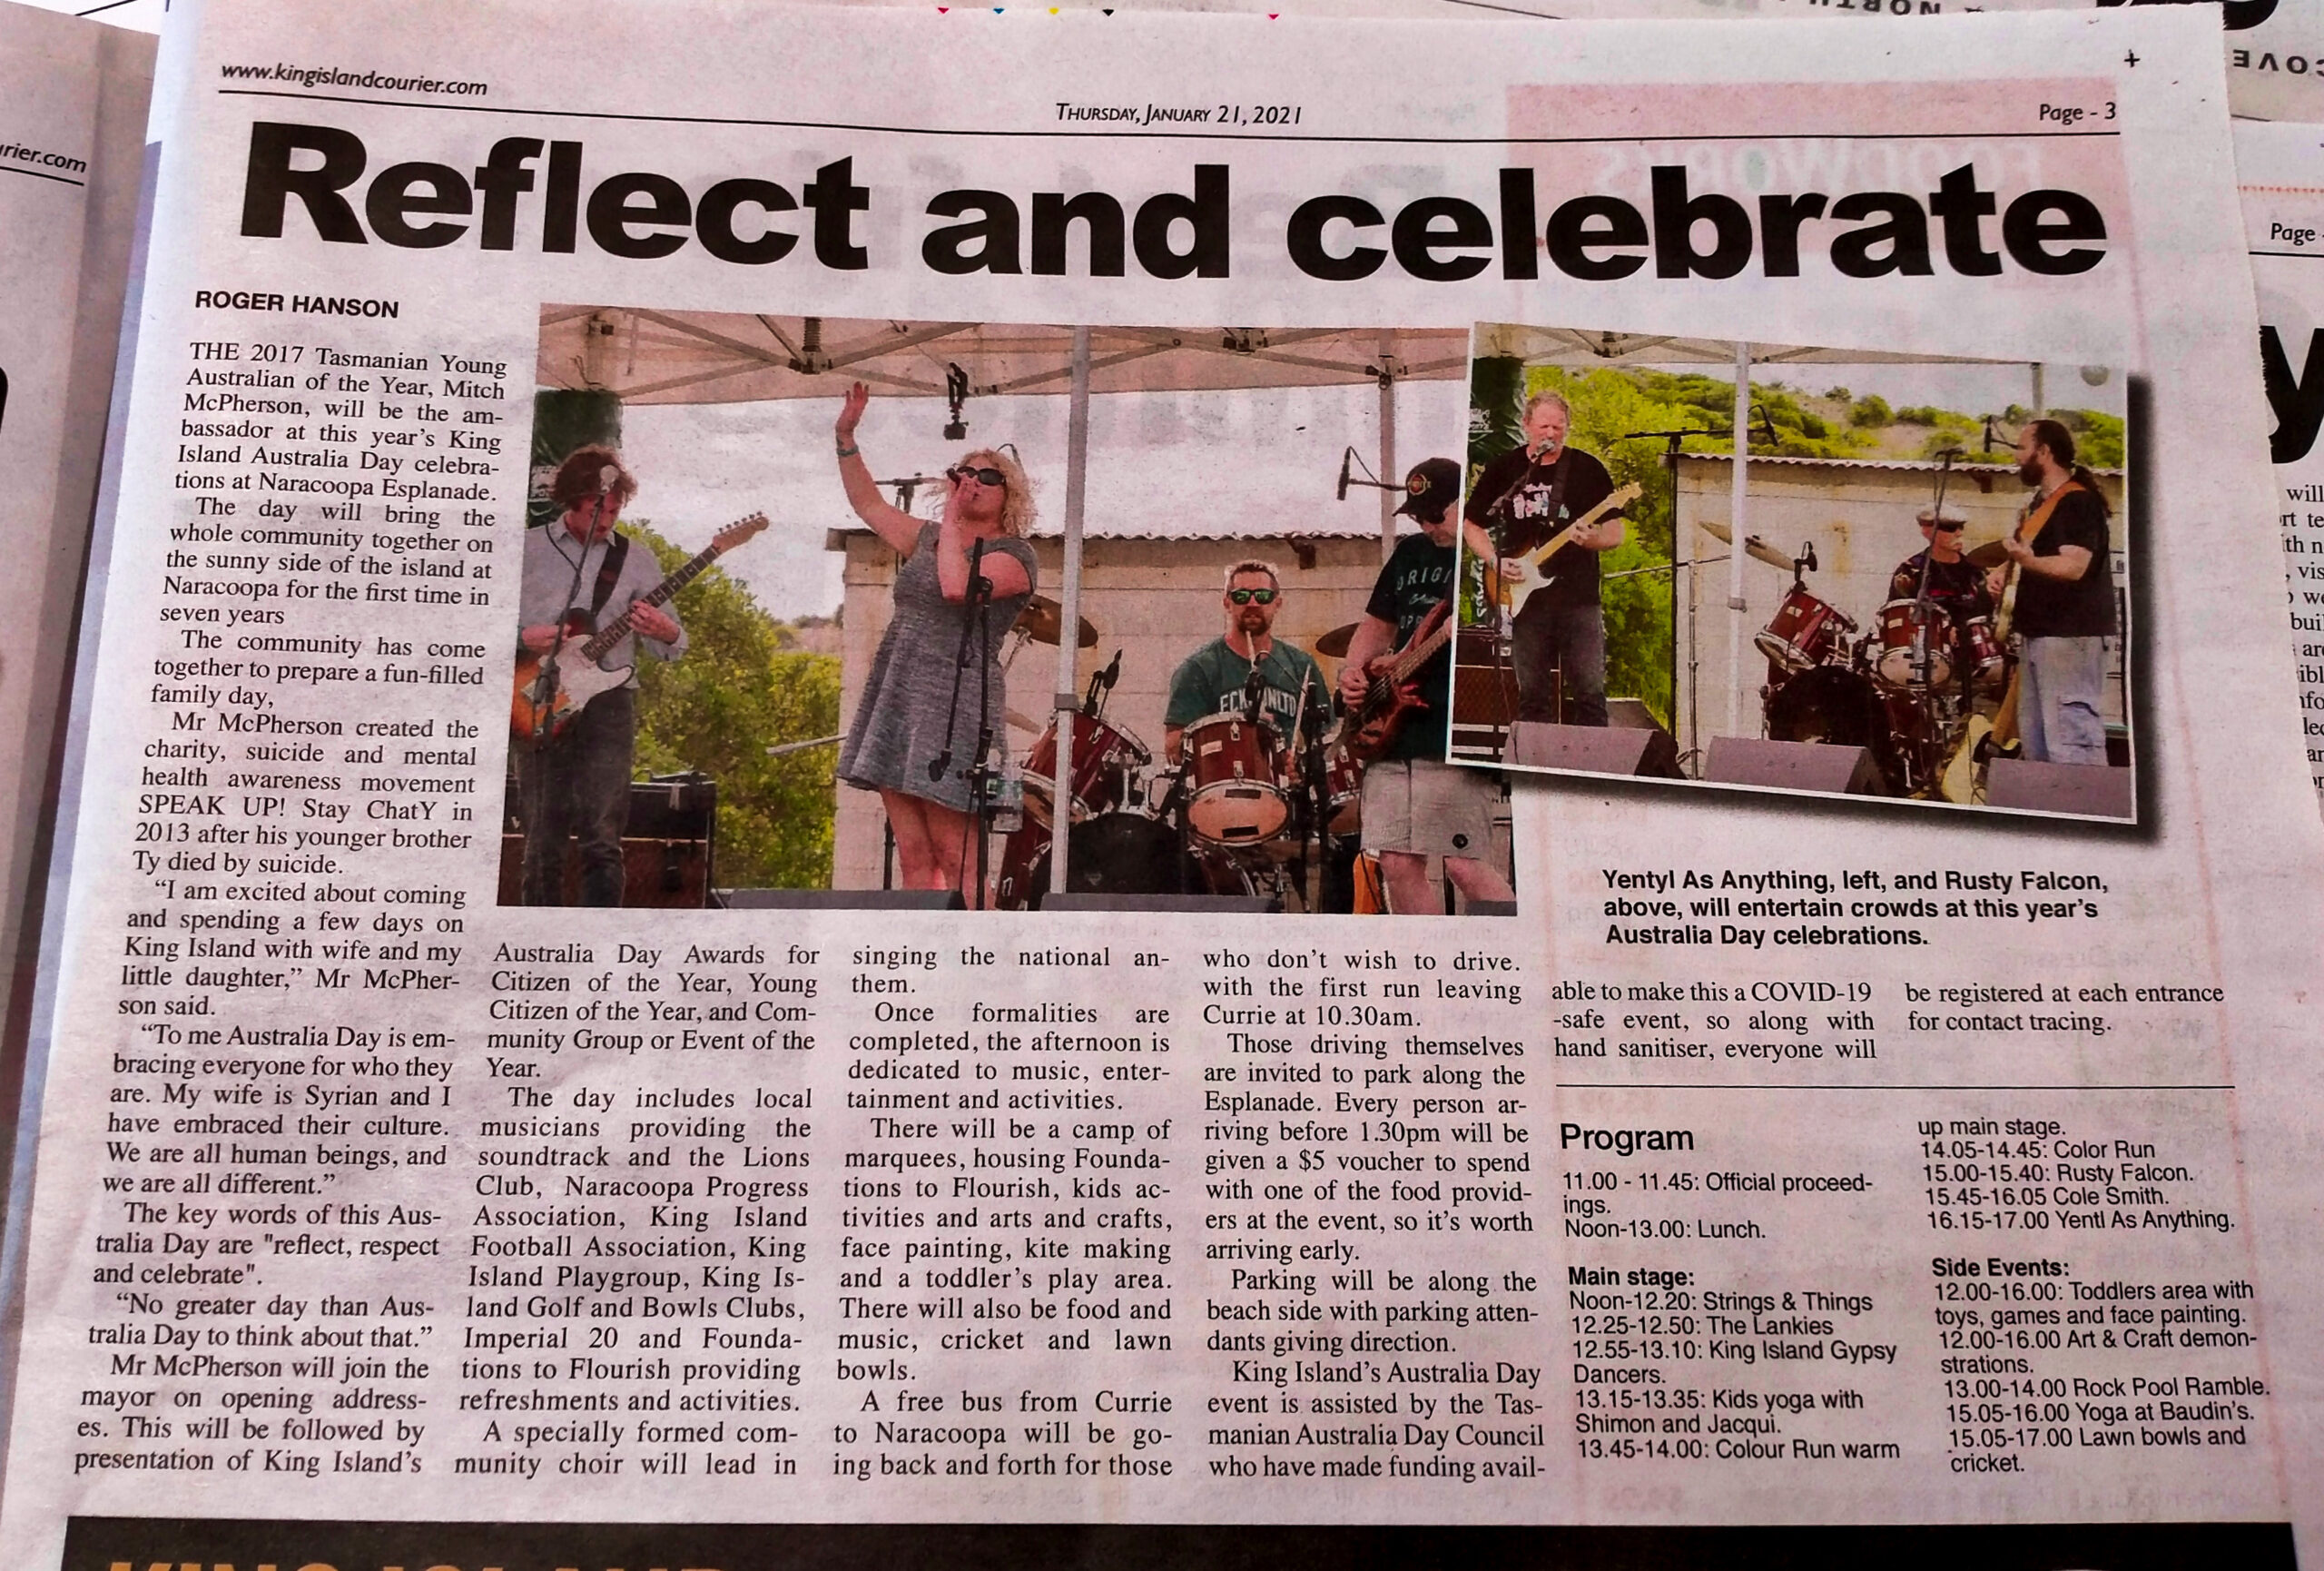 Excerpt of the King Island Courier, Yentl As Anything Article